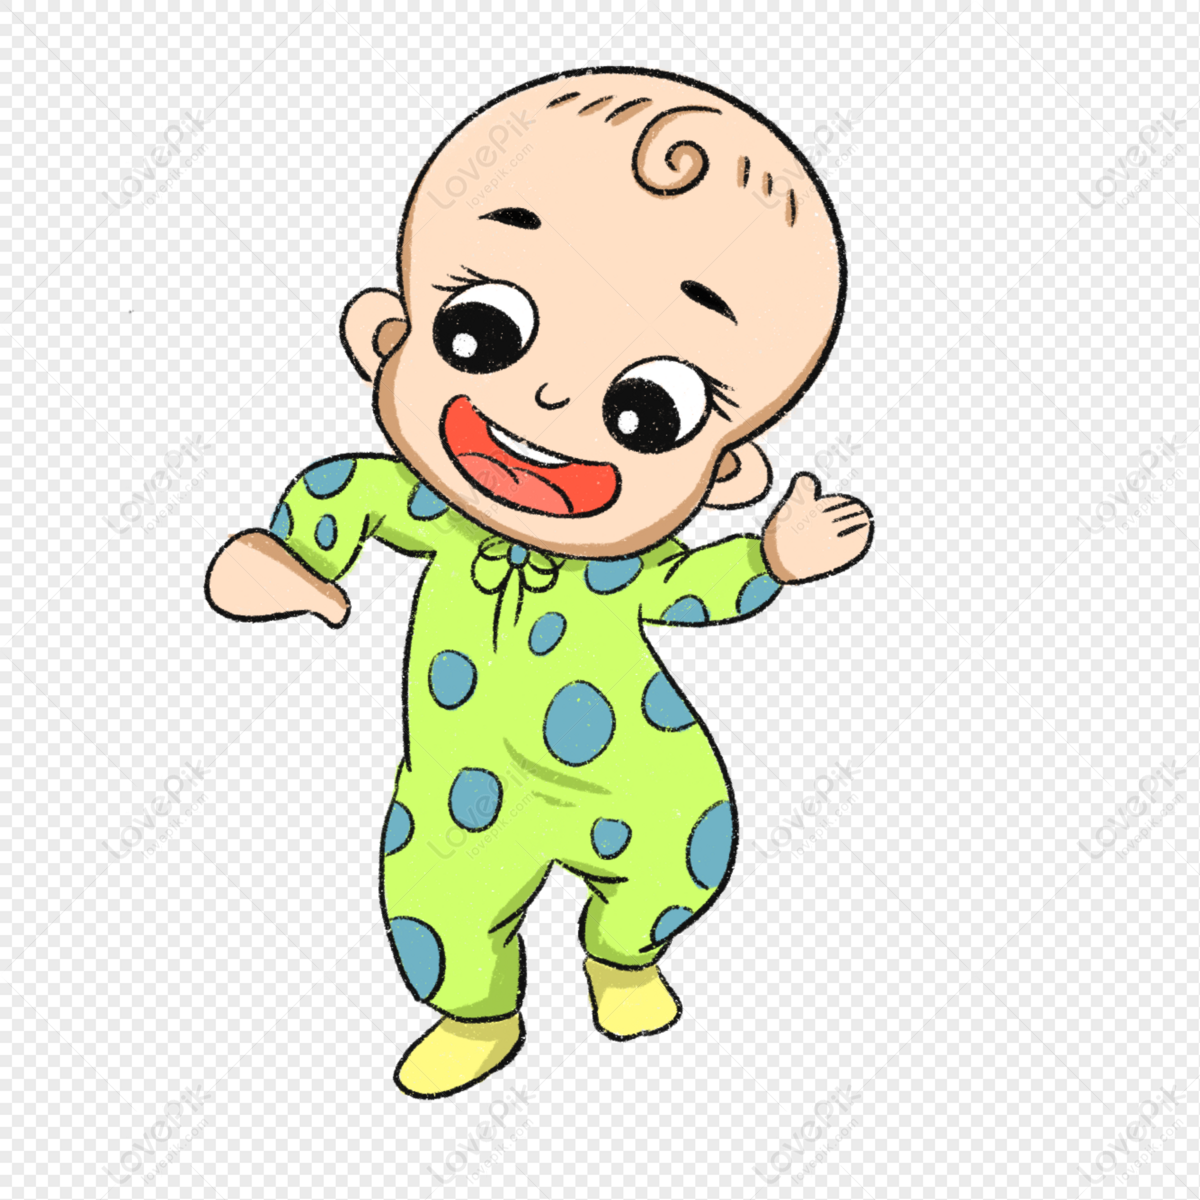 Cartoon Baby Learning To Walk PNG Transparent Background And Clipart Image  For Free Download - Lovepik | 401551700